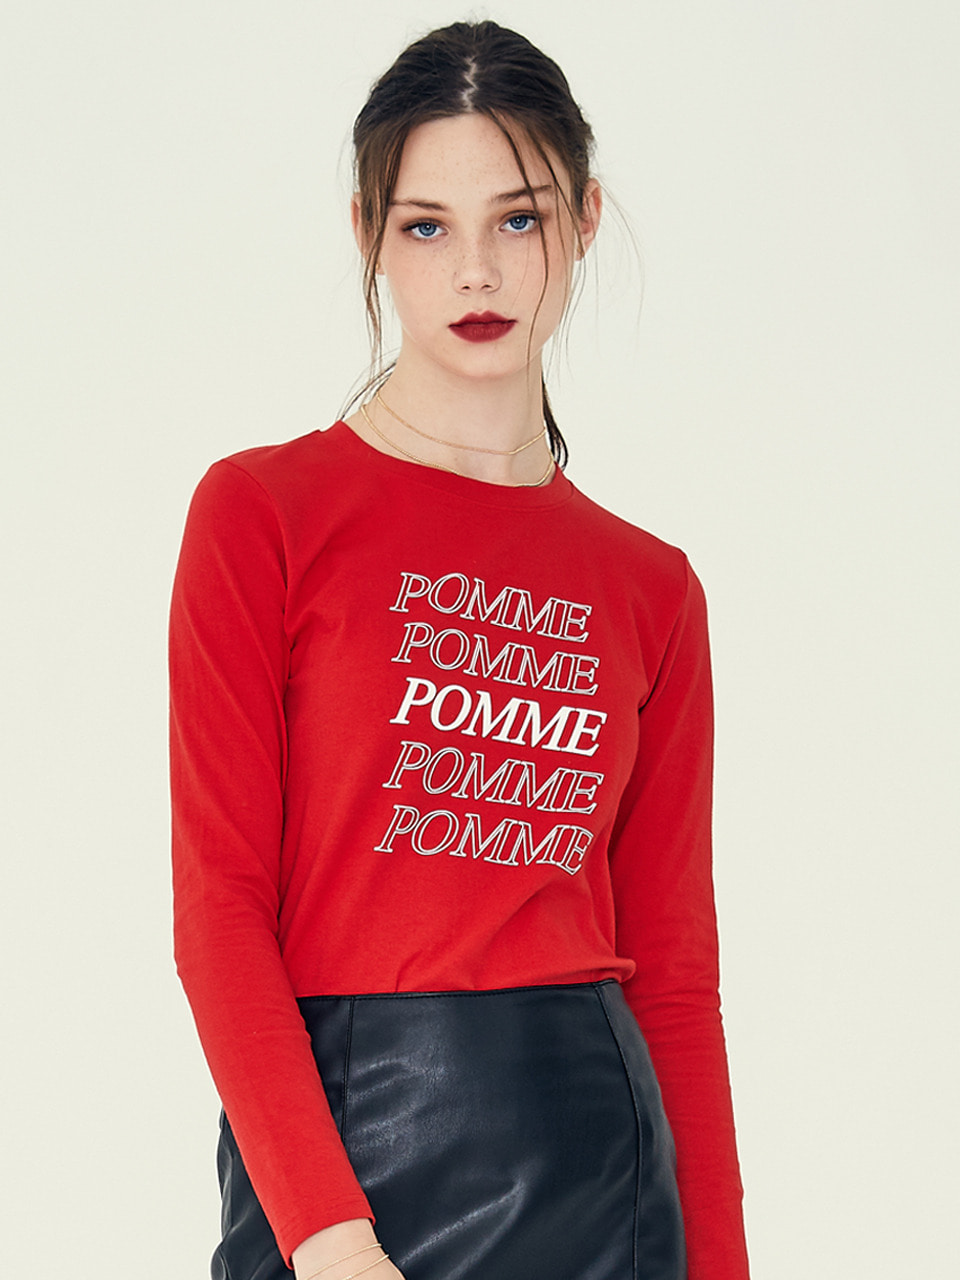 LE POMME T-SHIRT(RED)